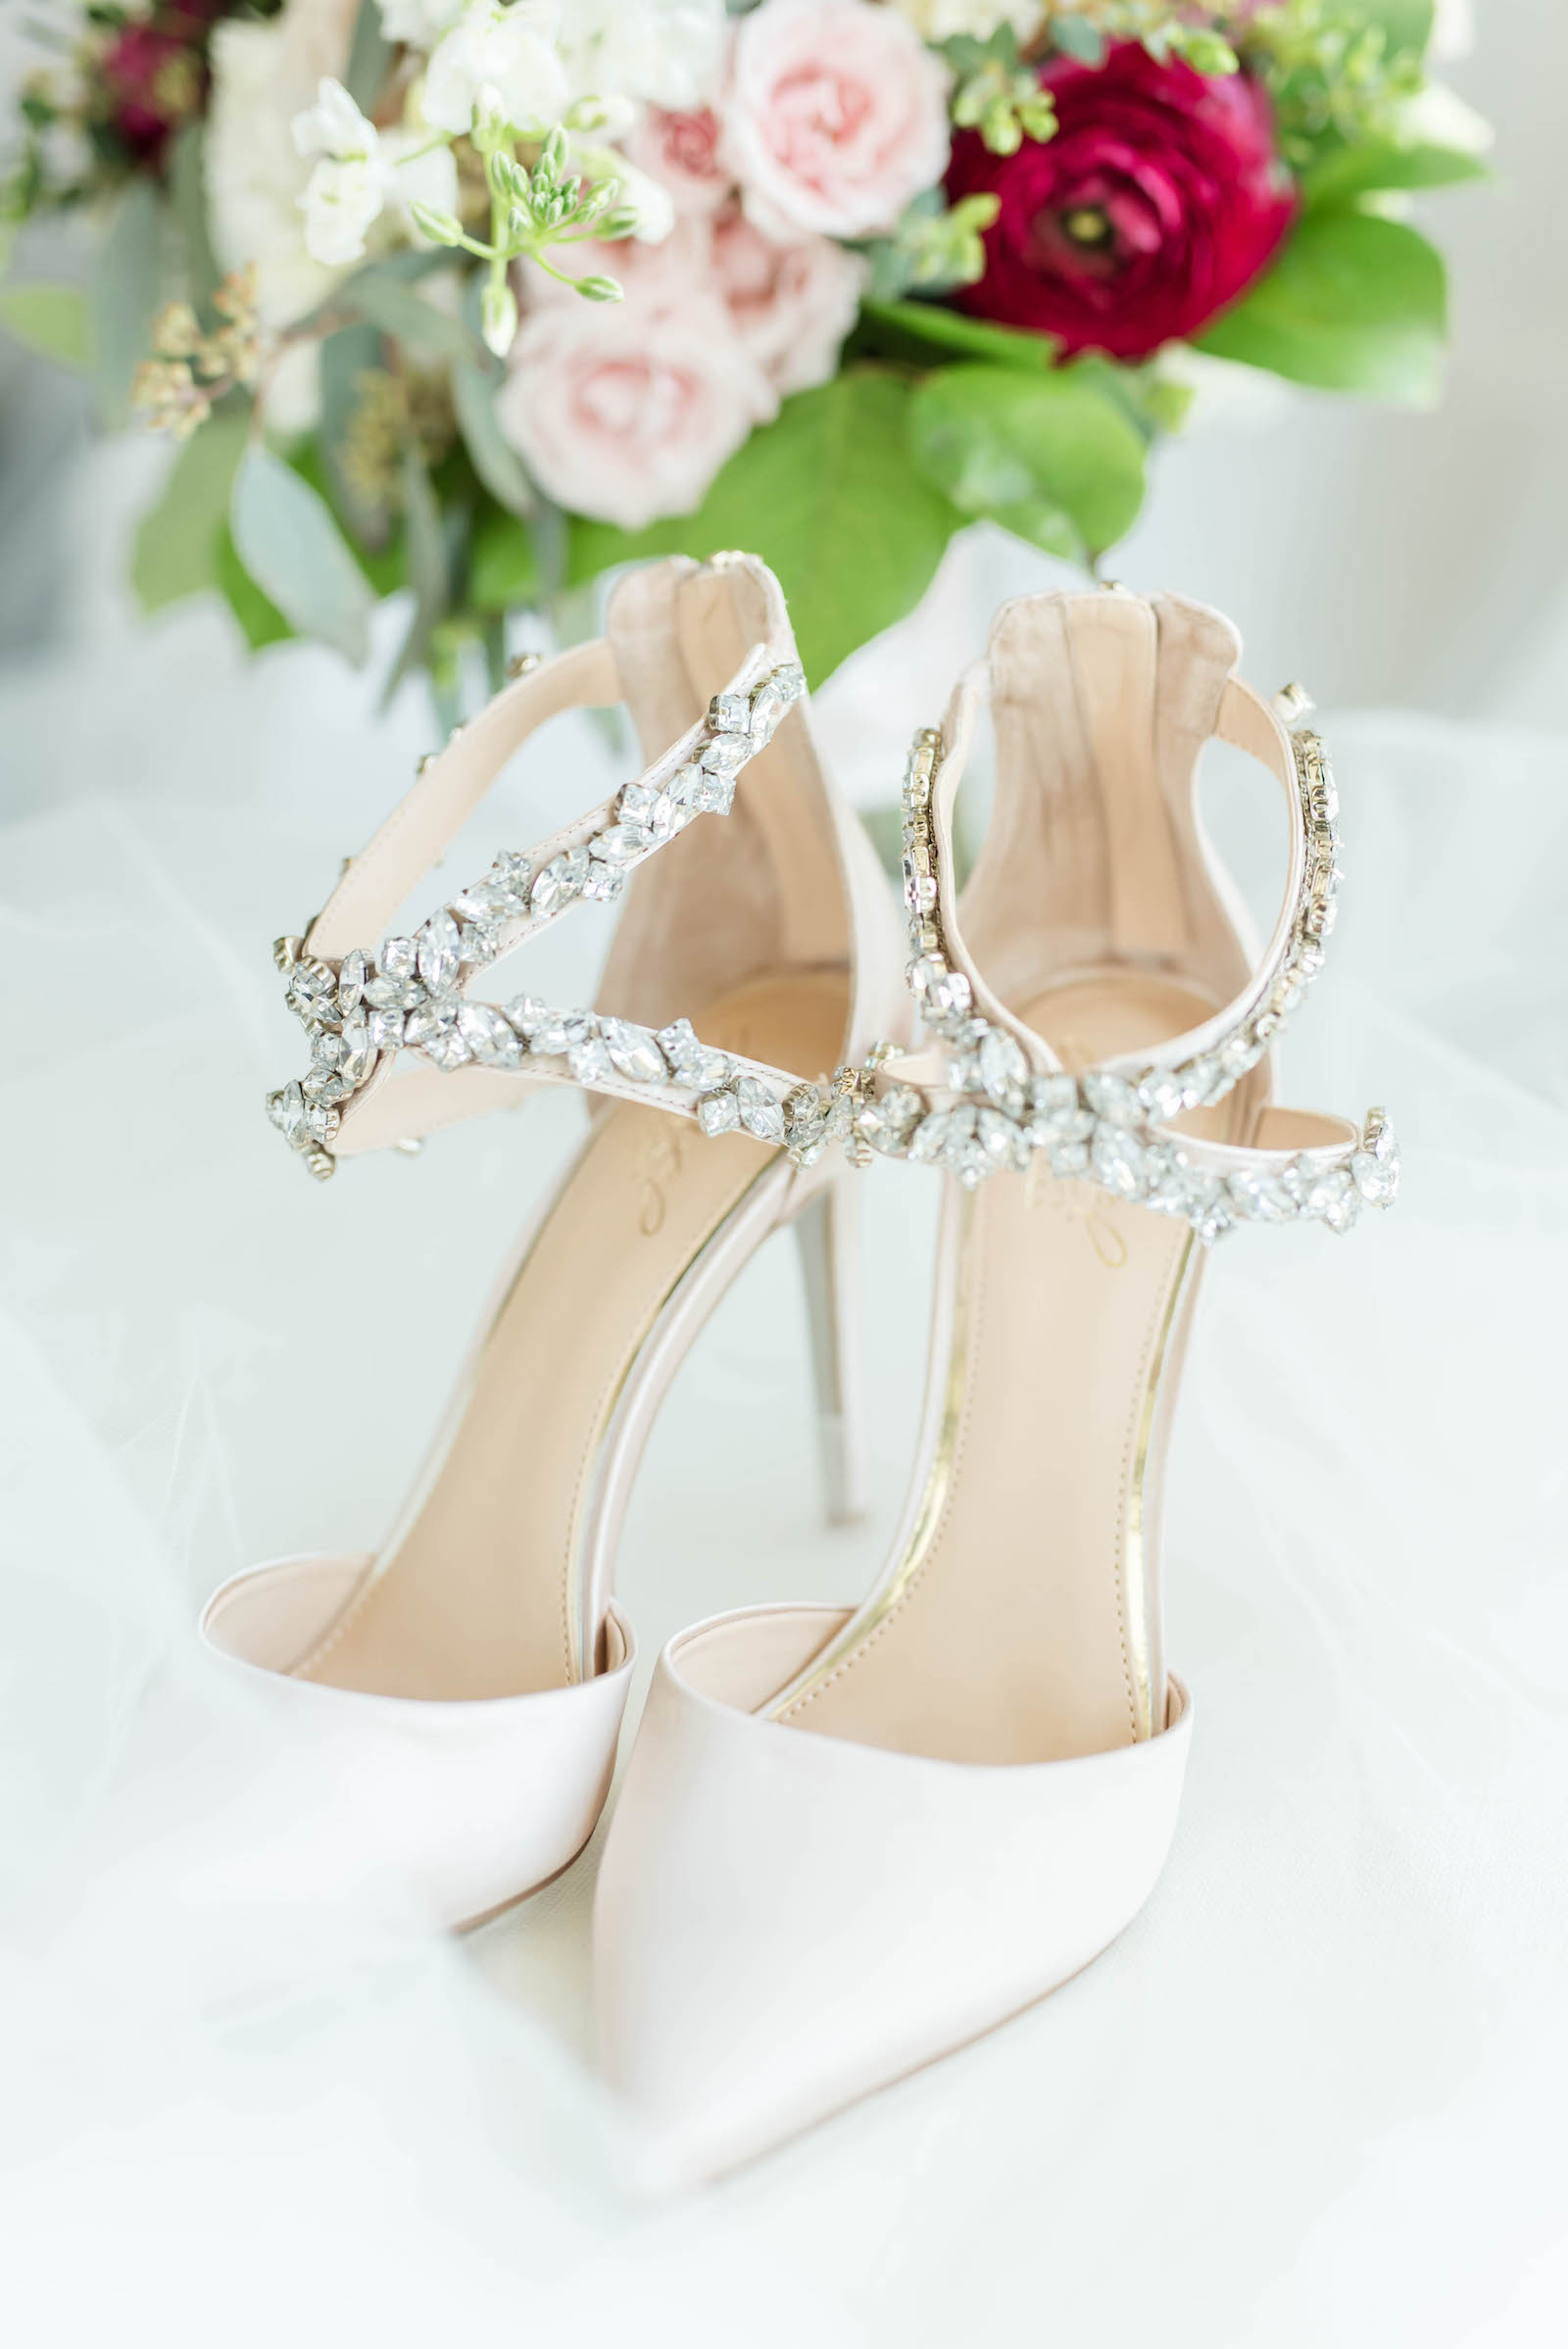 Bride Wedding Pointy Toe High Heel Shoes with Rhinestone Ankle Straps